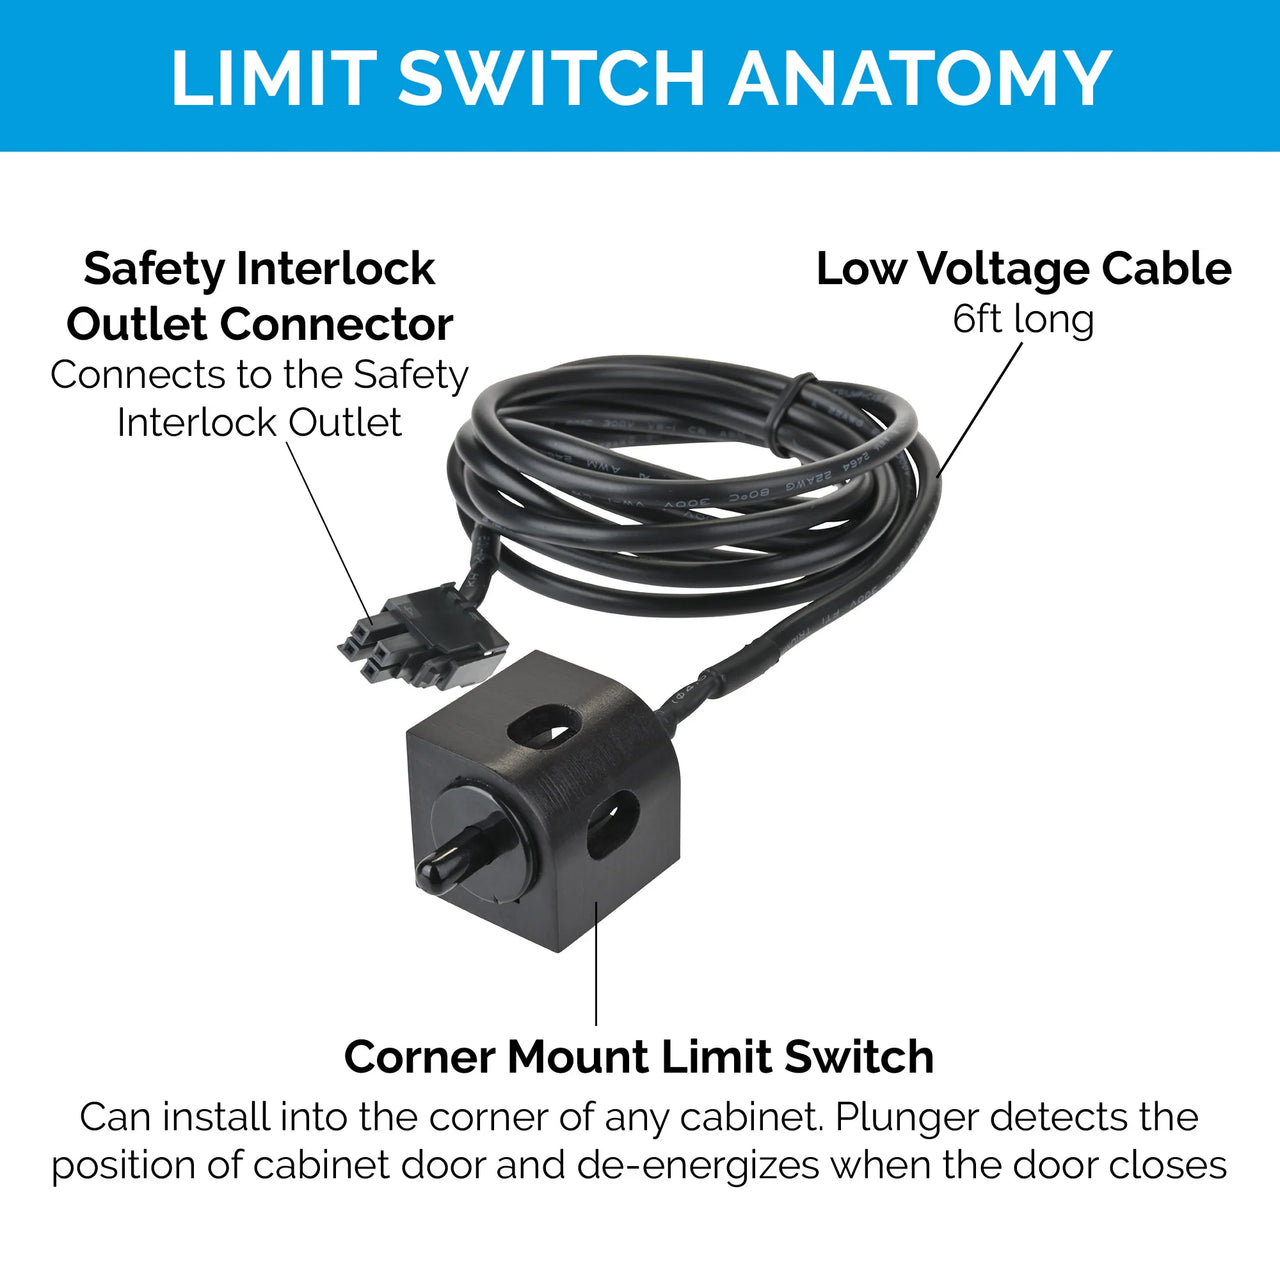 Safety Interlock Outlet with Corner Mount Limit Switch